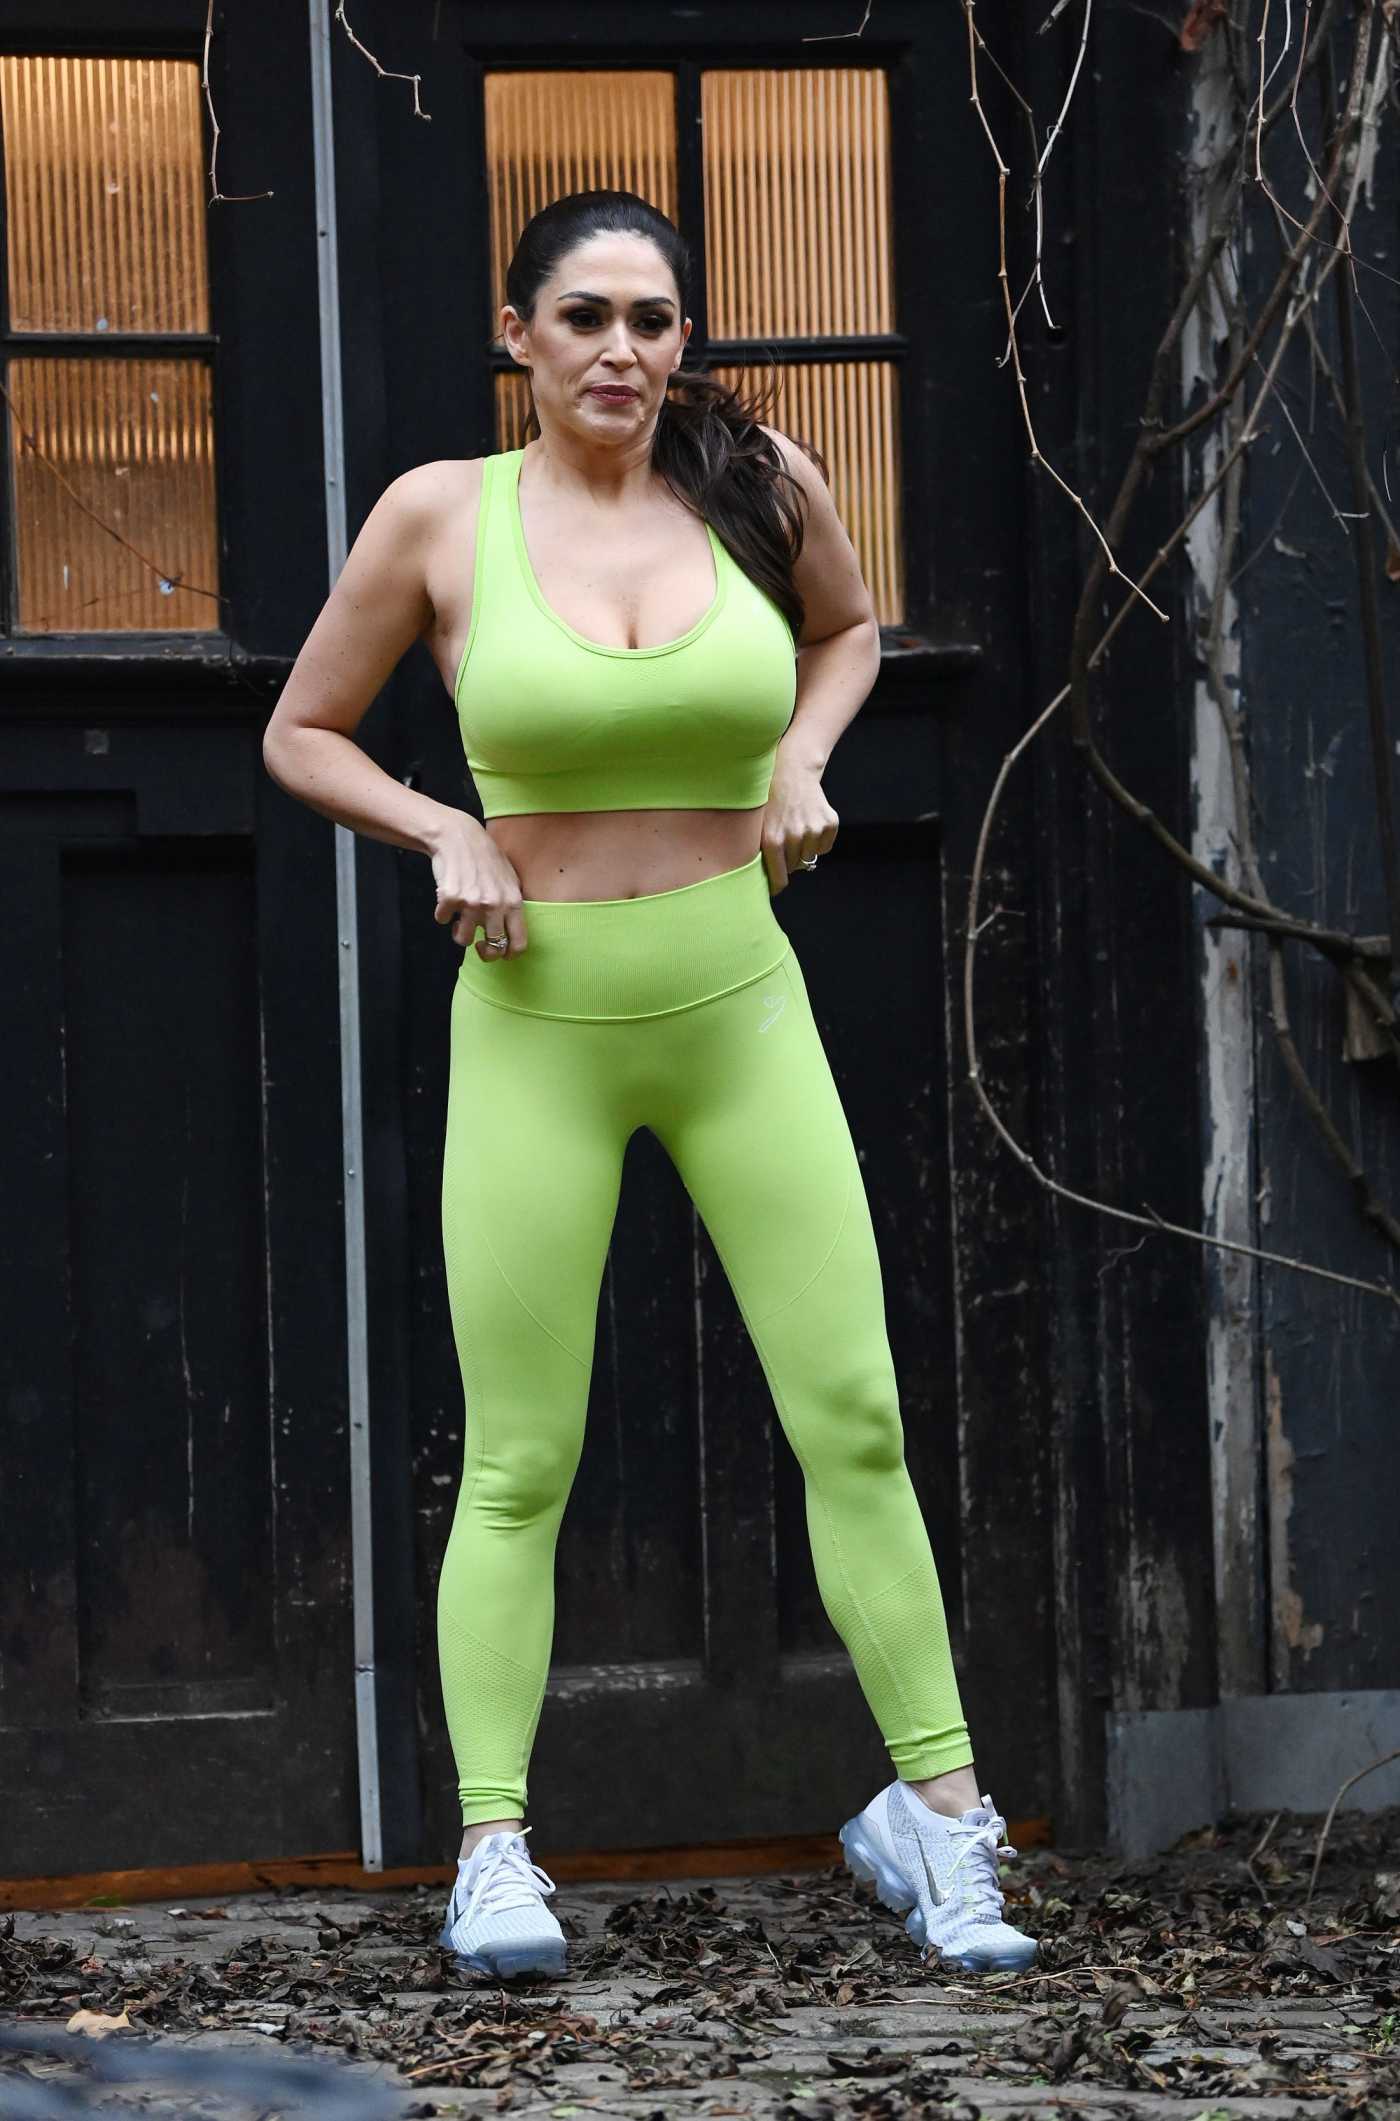 Casey Batchelor in a Neon Green Workout Ensemble Filming Her Yoga Blitz App in East London 02/07/2022